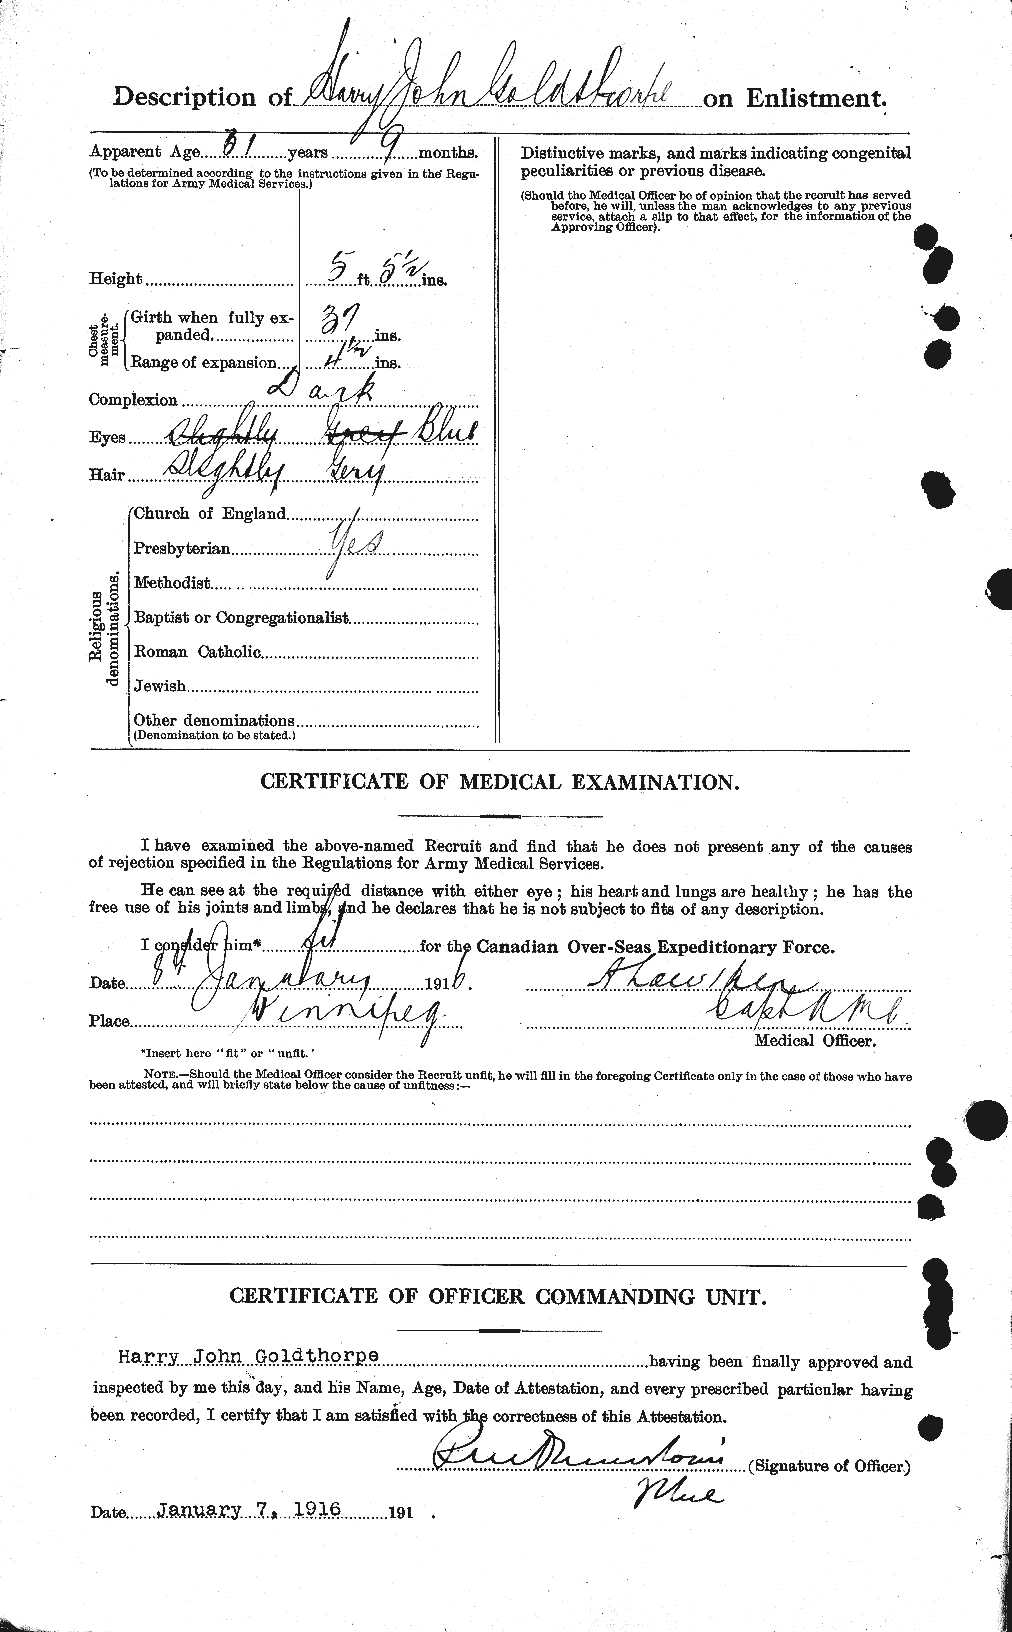 Personnel Records of the First World War - CEF 354164b